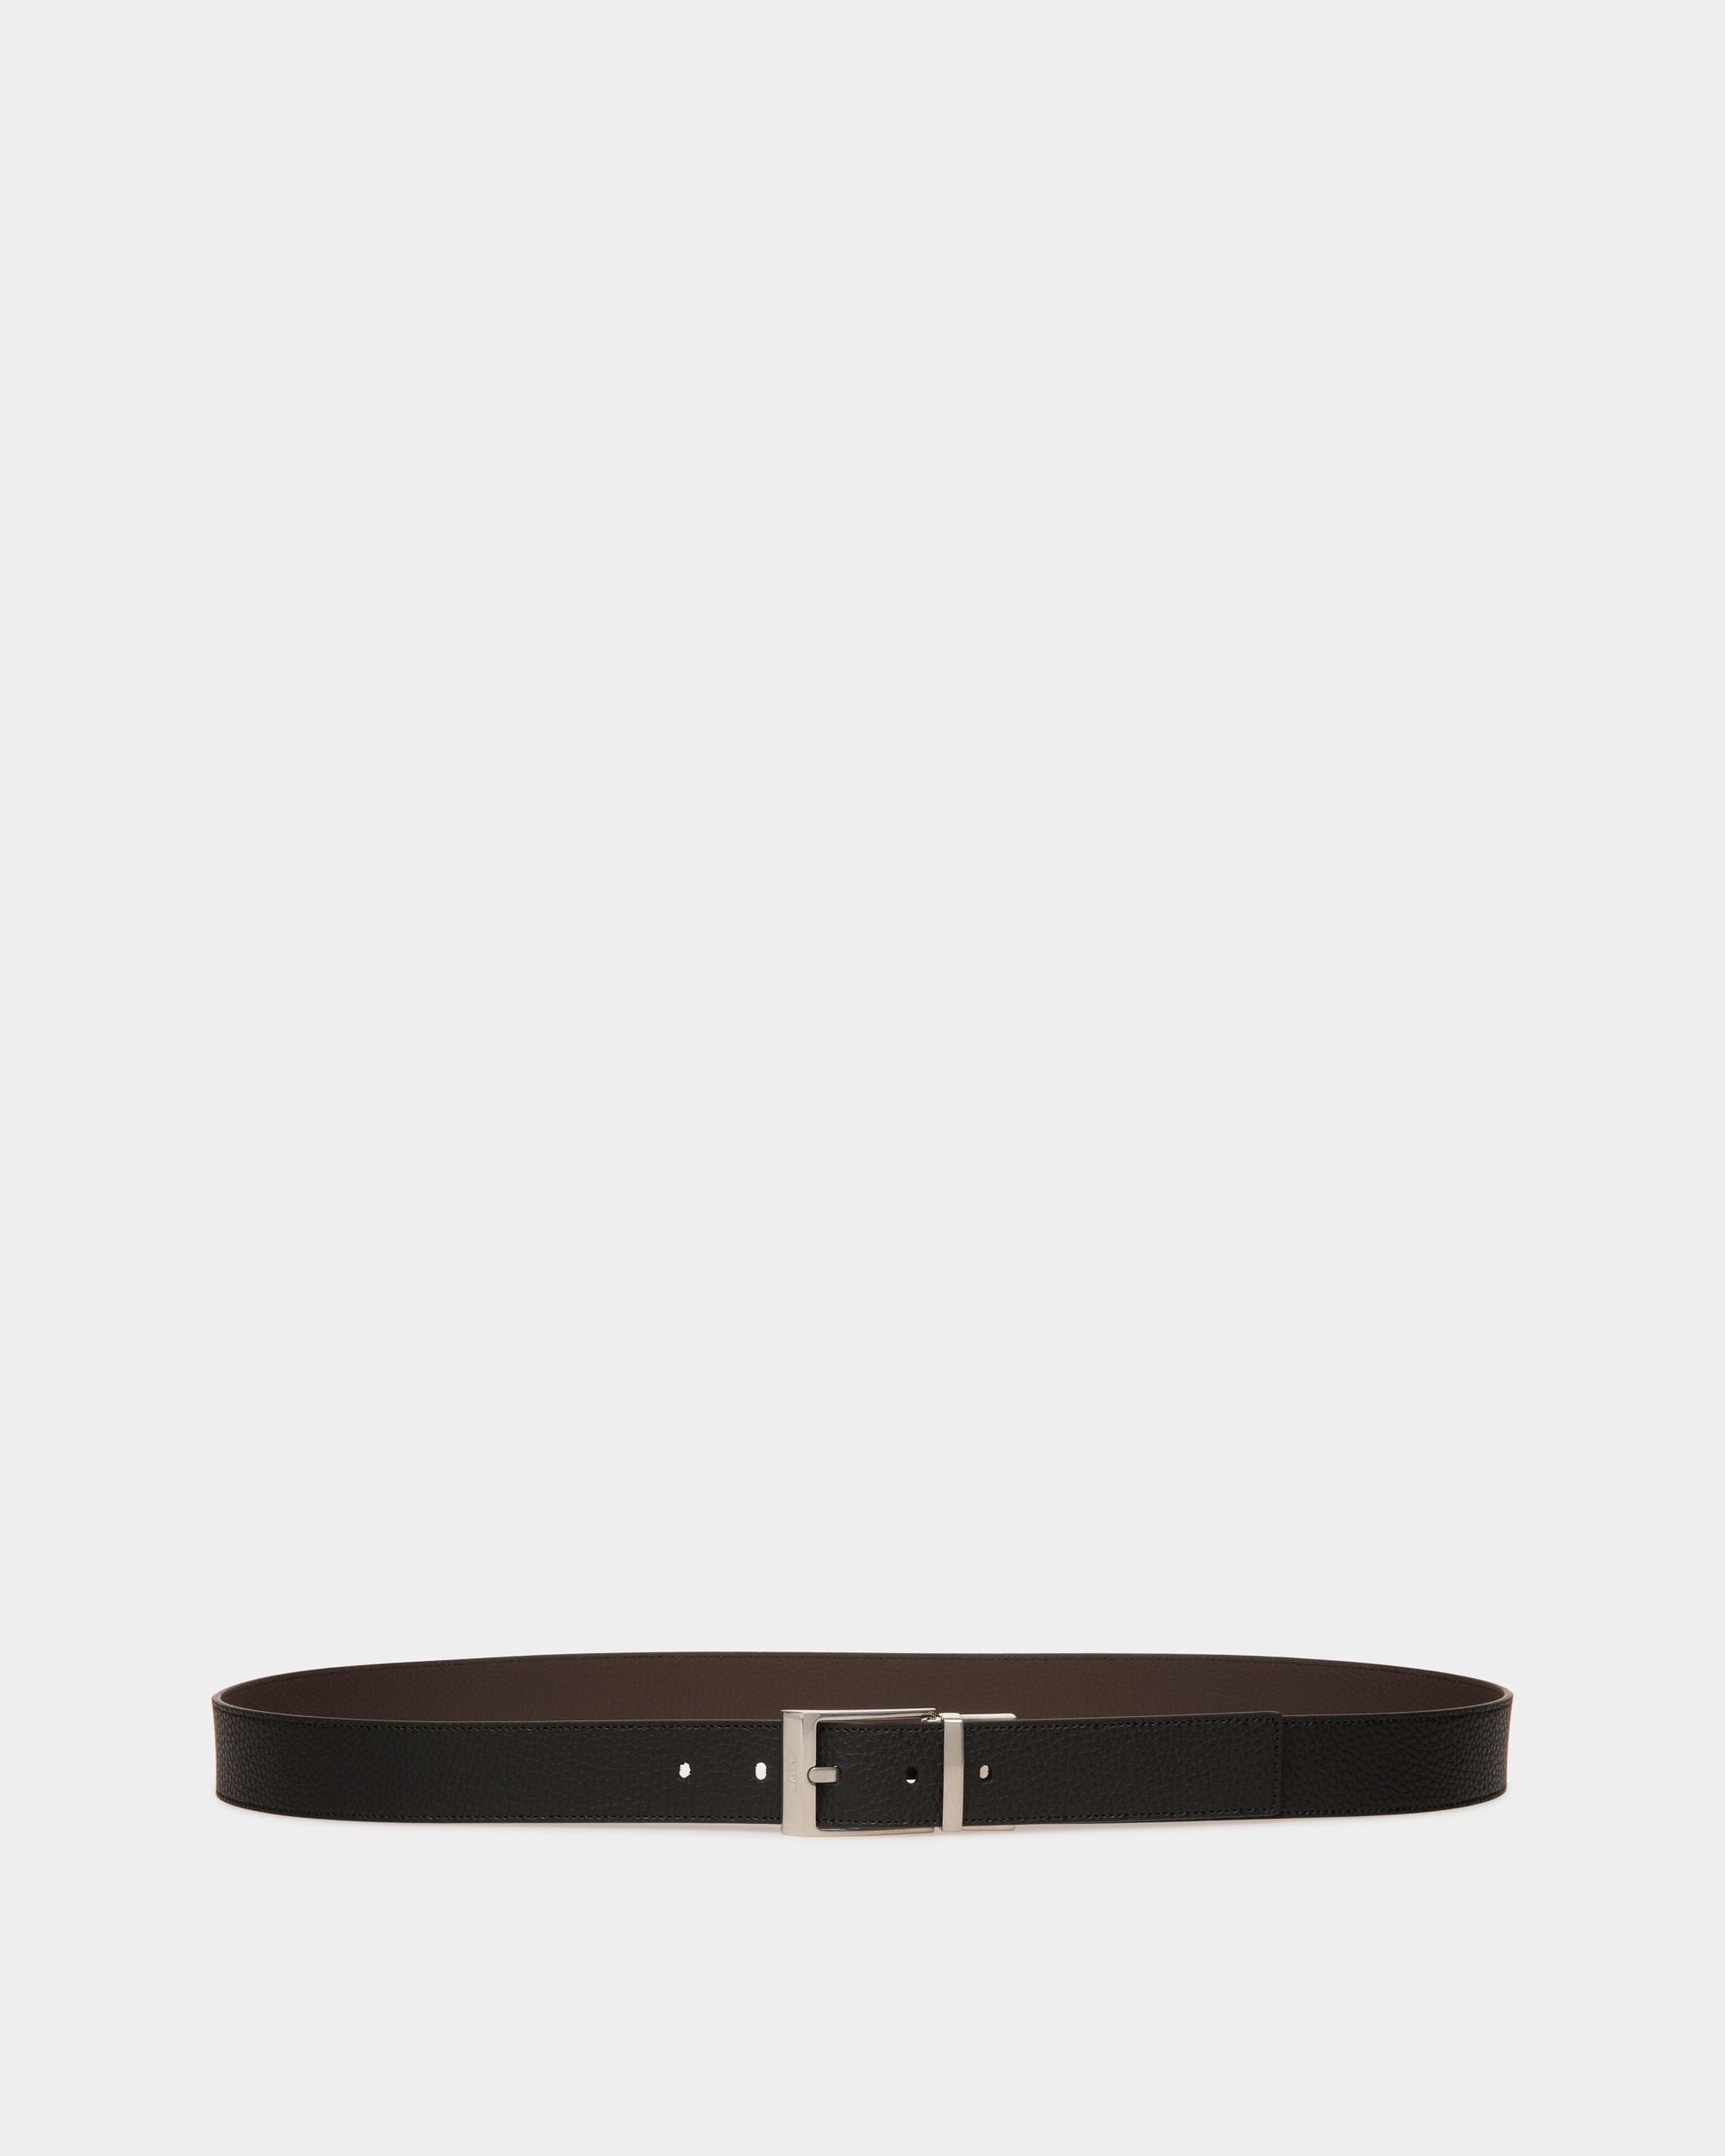 Shiffie 35 | Men's Adjustable And Reversible Belt | Brown And Black Leather | Bally | Still Life Front